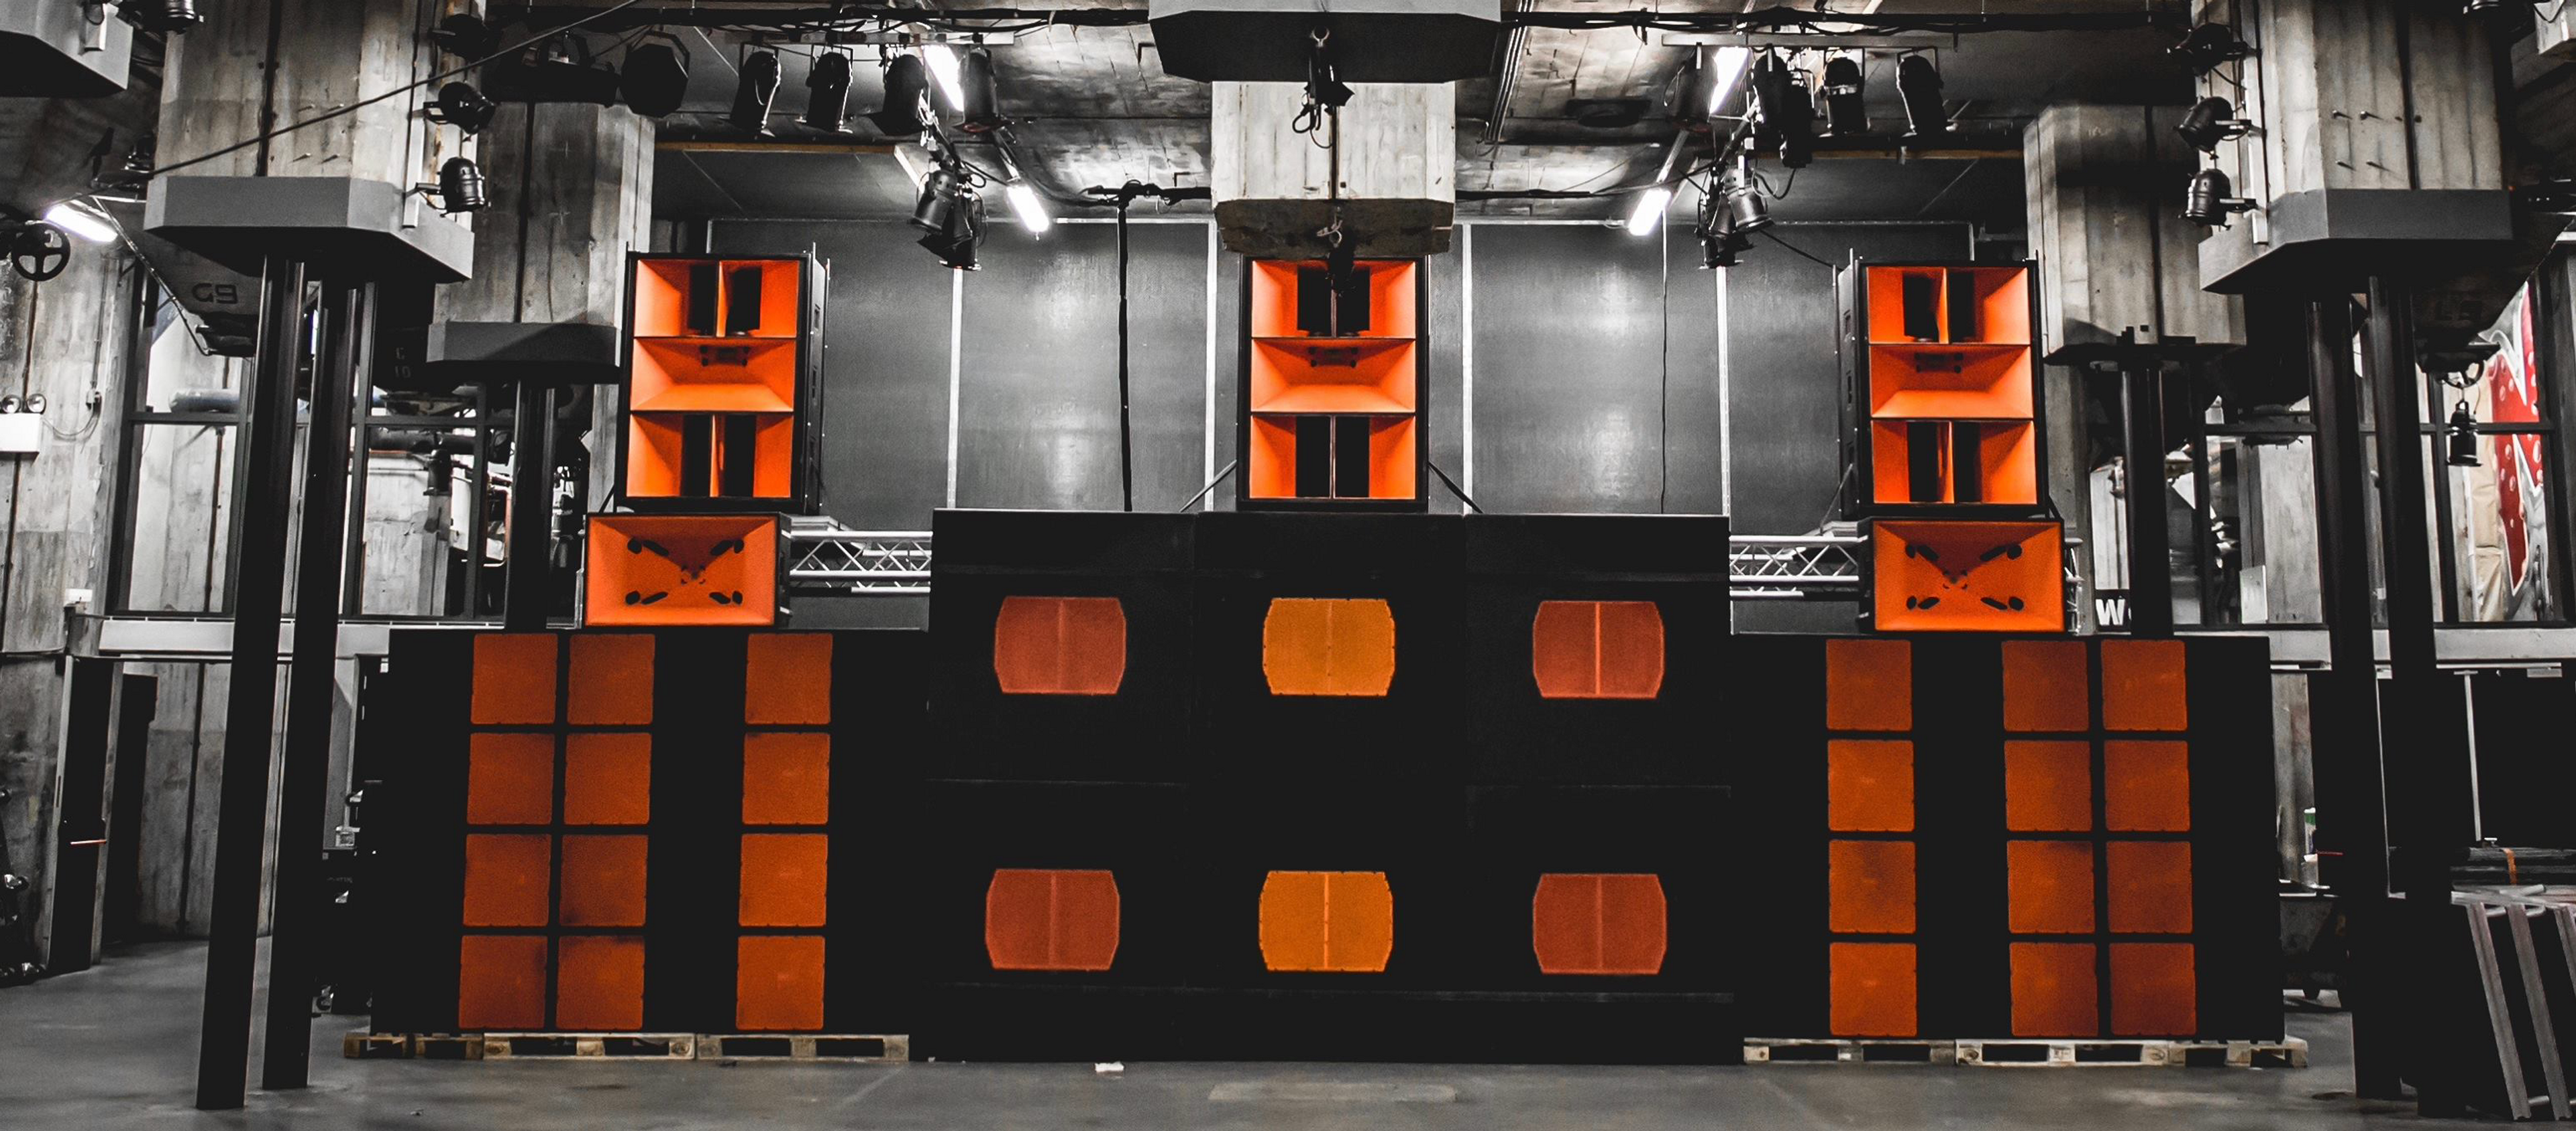 DVS1 presents the Wall of Sound